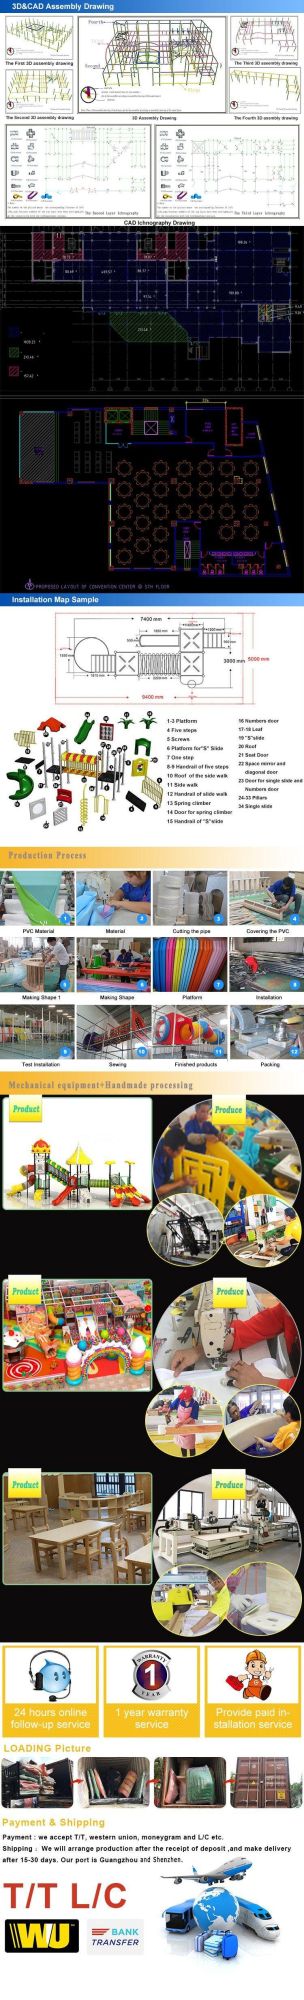 S021 Custom Design Fast Shipping Playground System Factory China